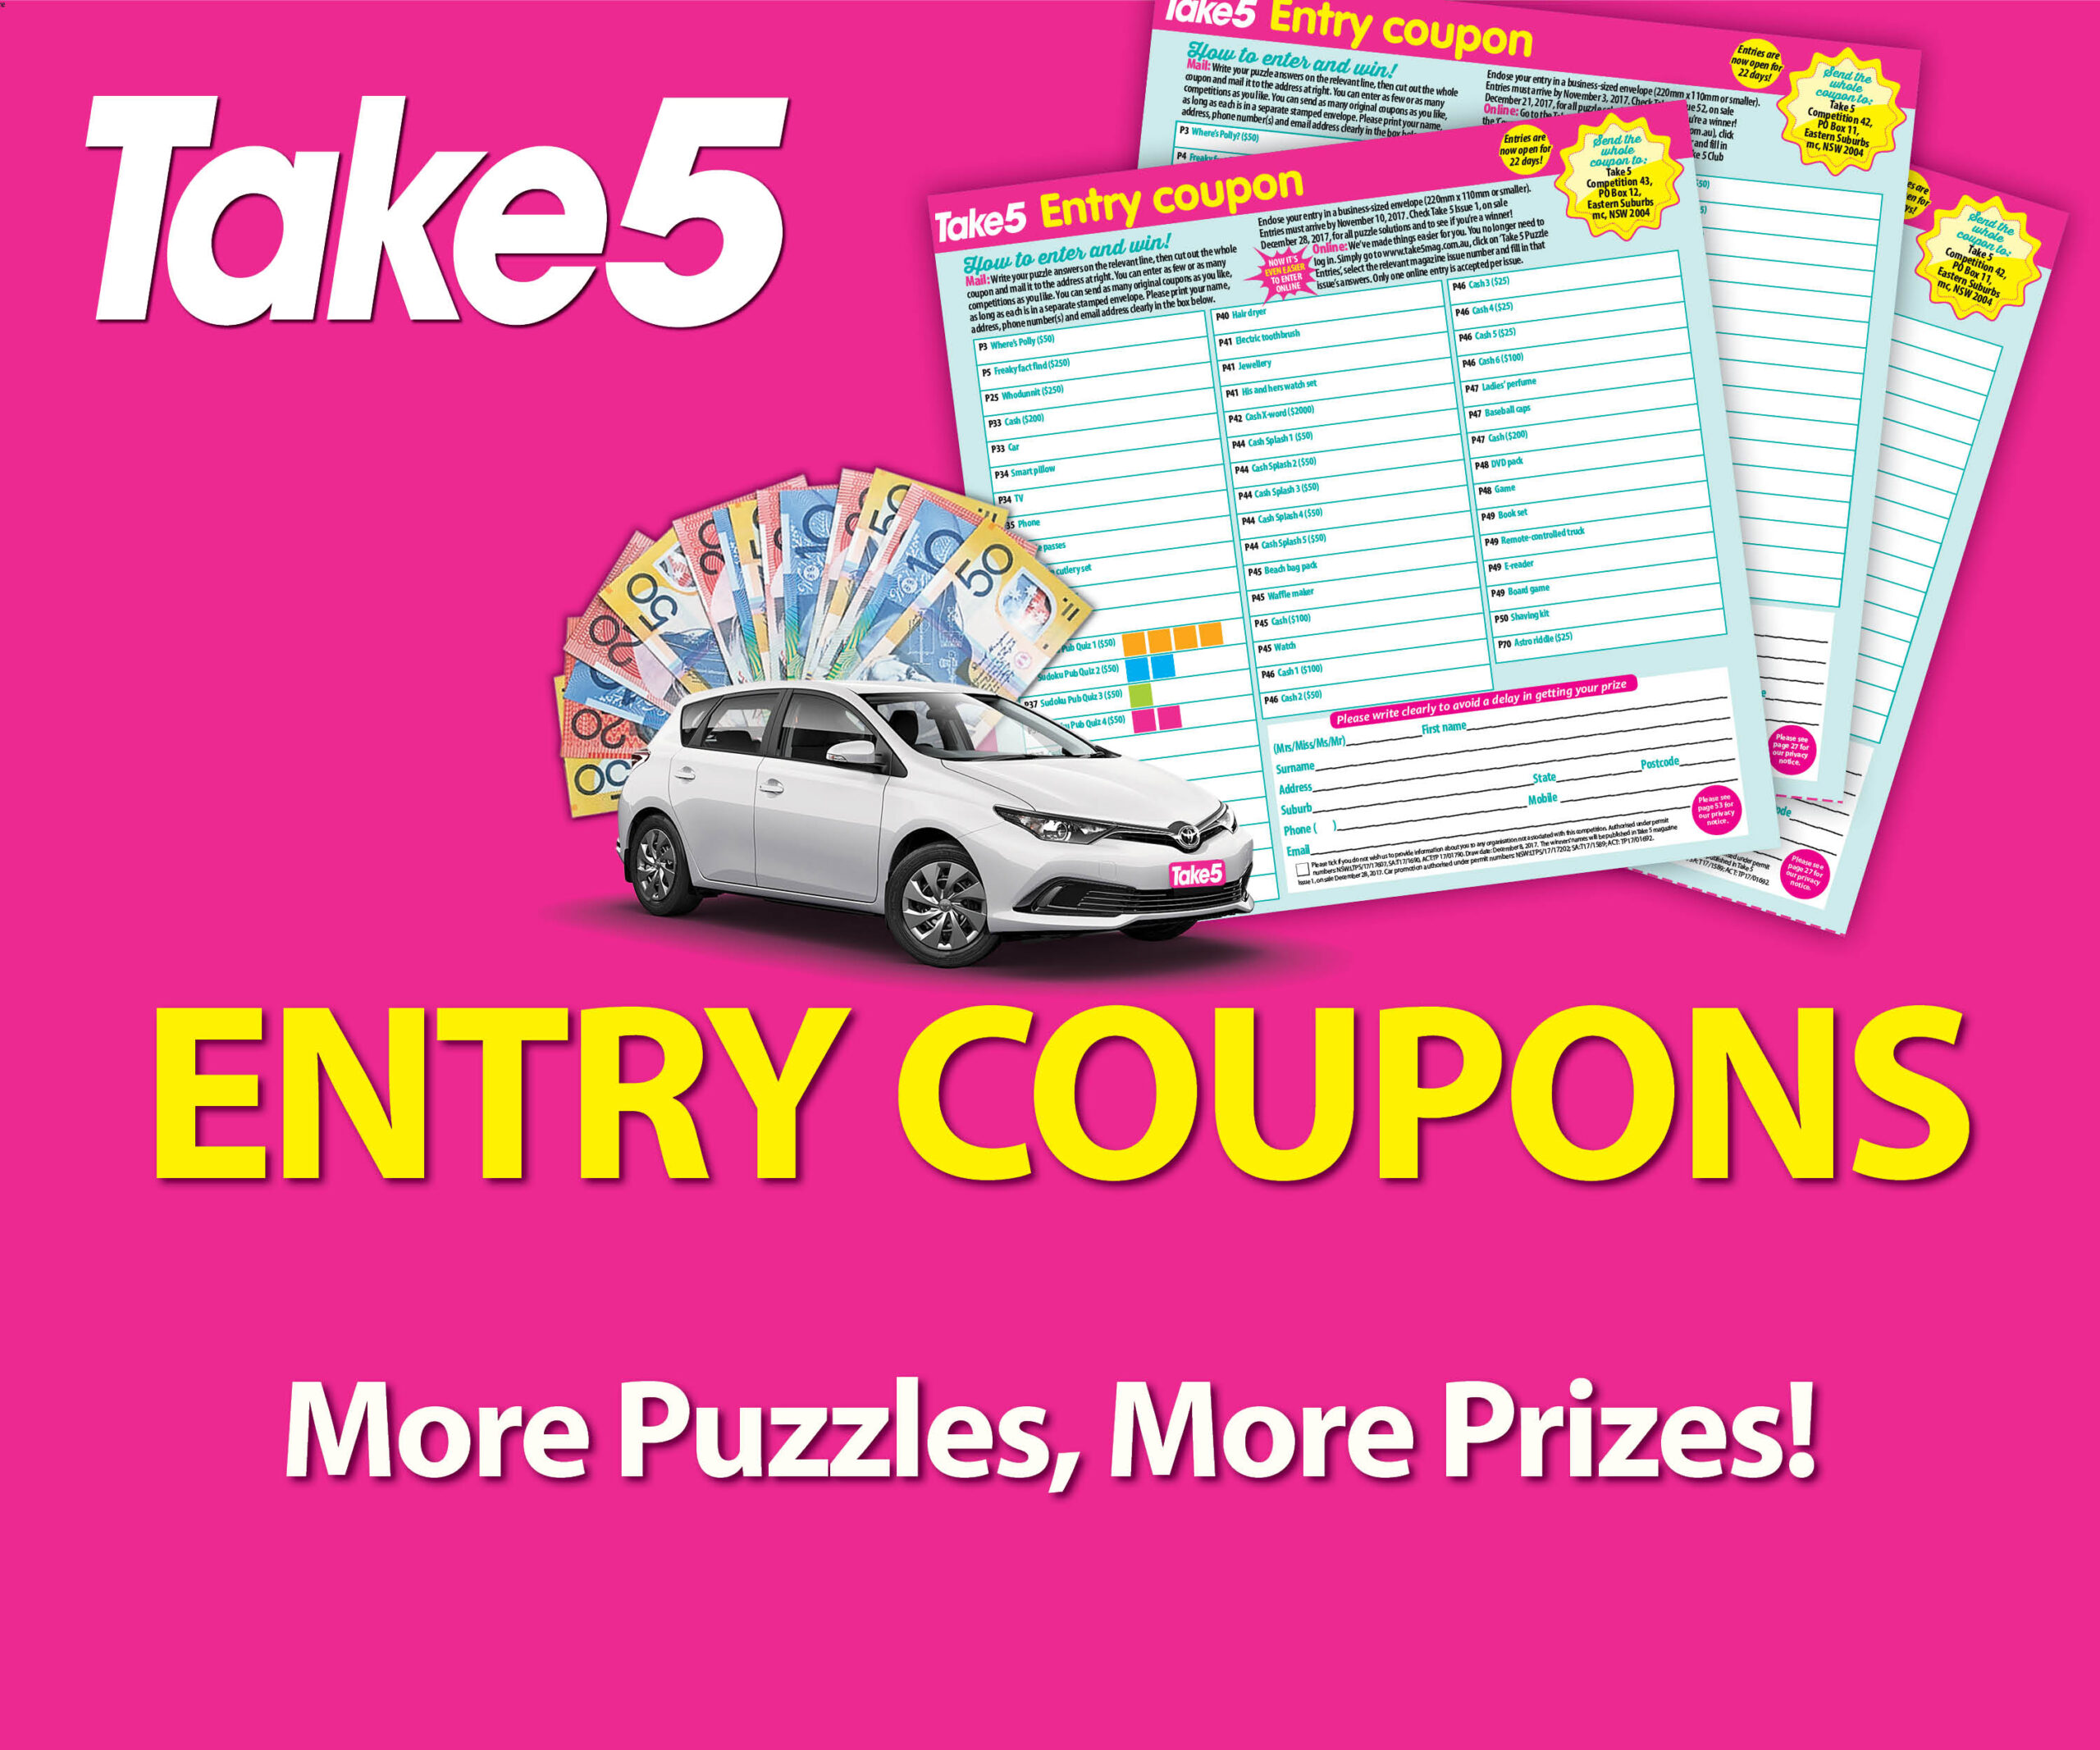 Enter Your Take 5 Entry Coupons Here